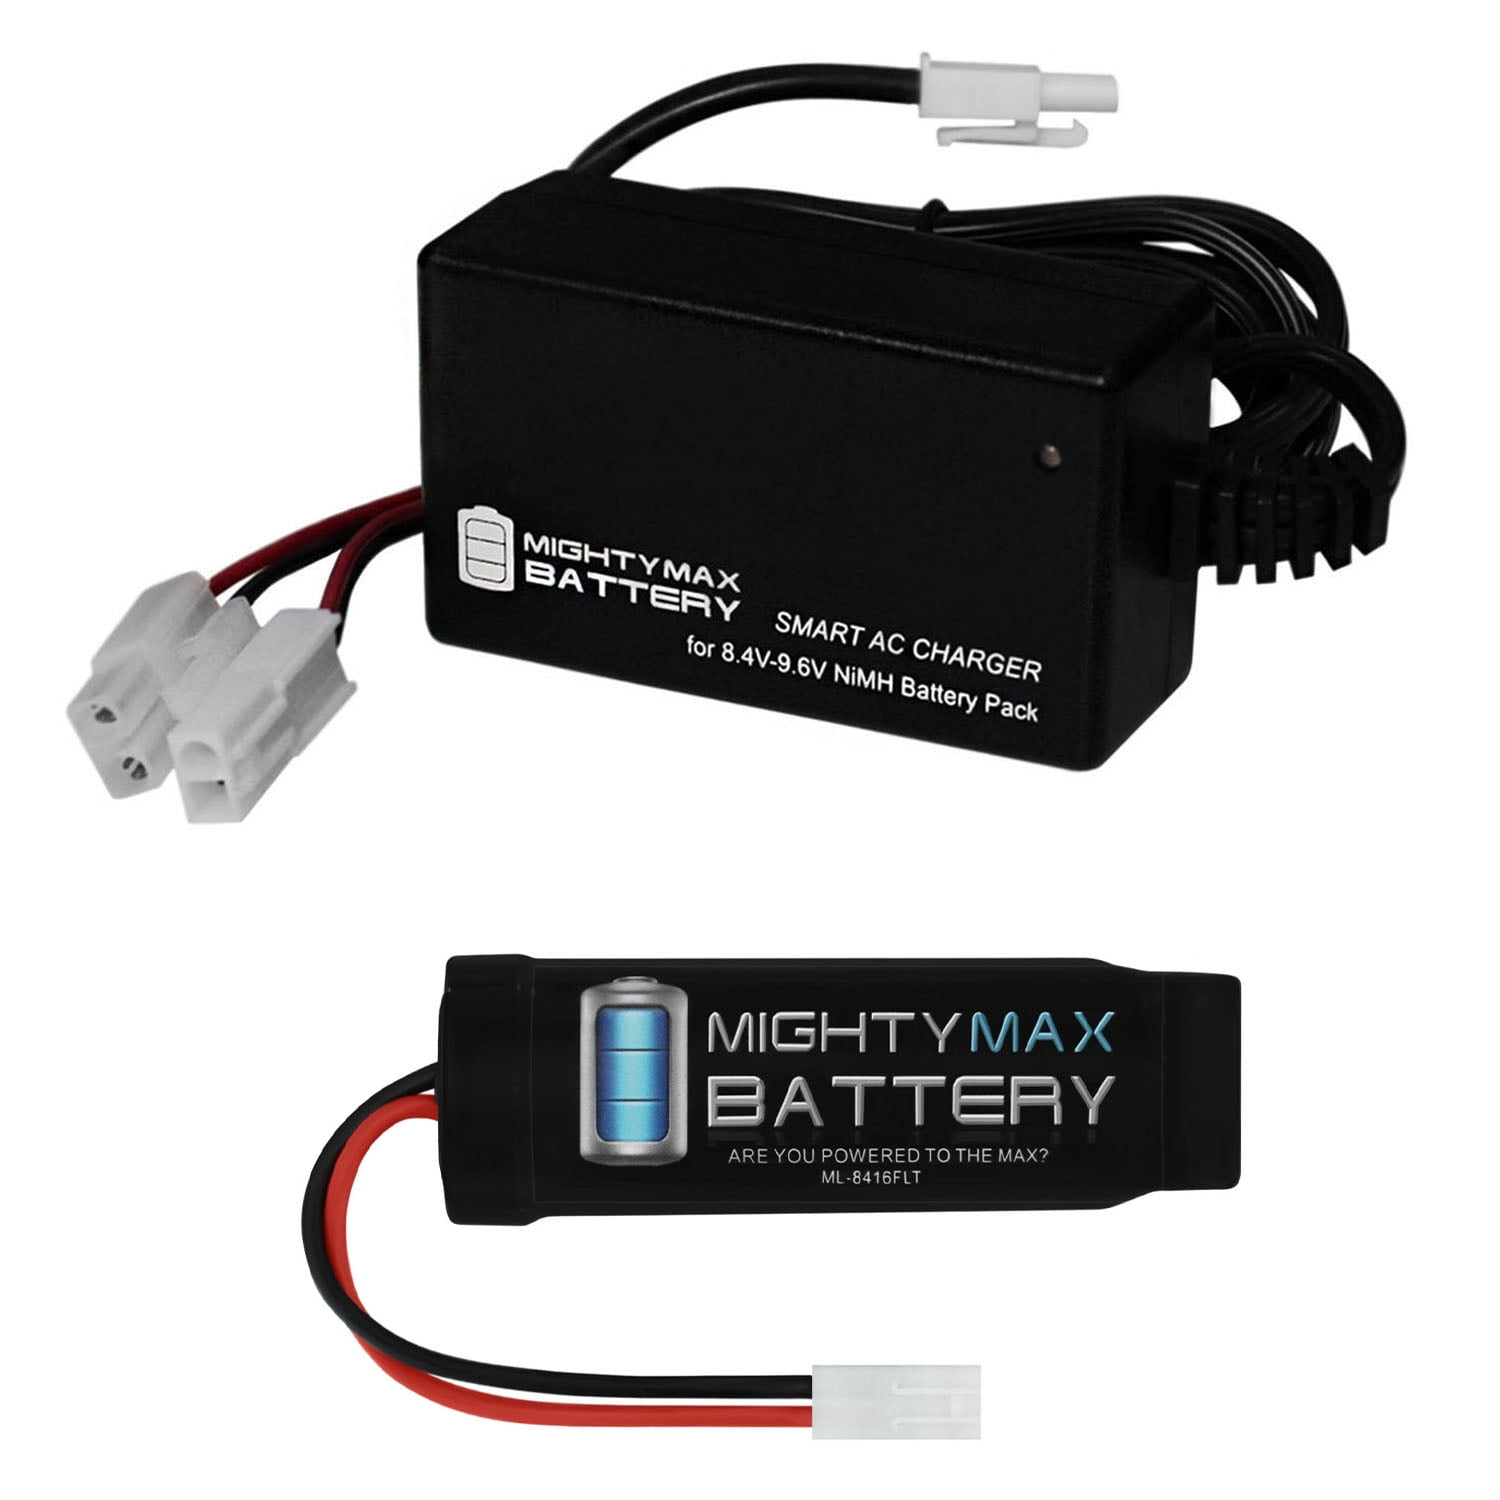 Tenergy 9.6v 2000mah NiMH Nunchuck Butterfly Airsoft Battery for sale online 